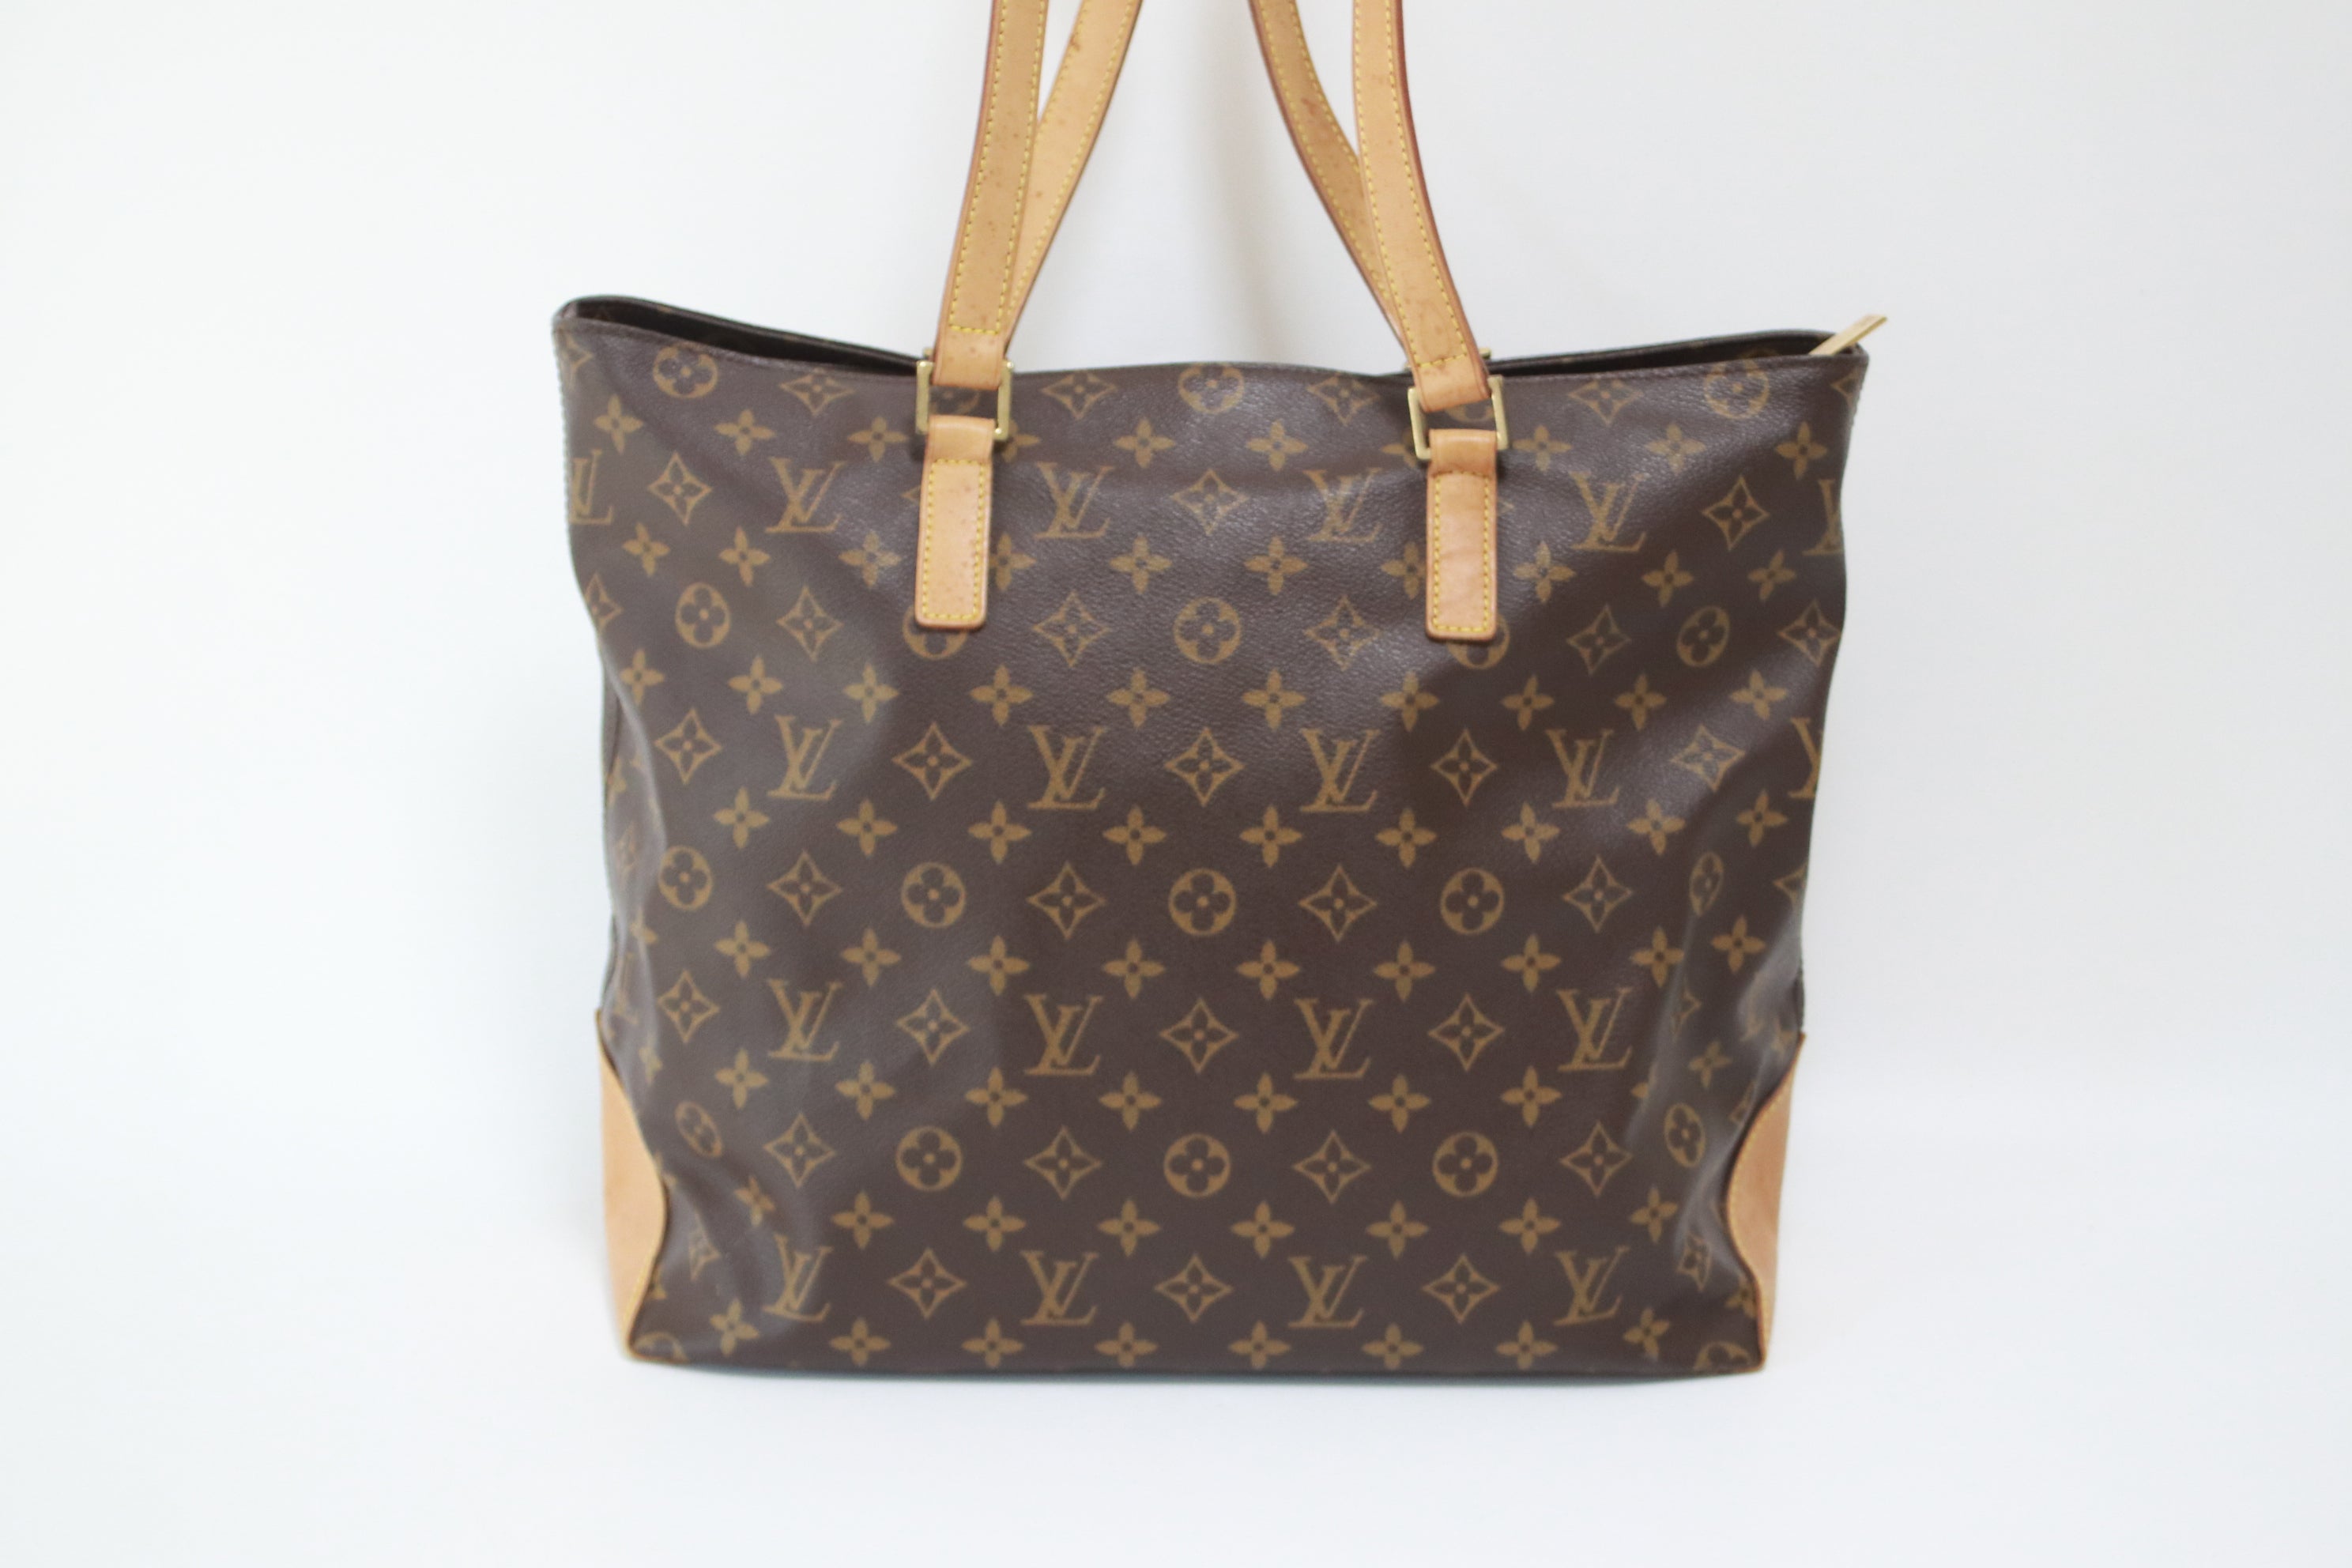 Bag and Purse Organizer with Regular Style for Louis Vuitton Hampstead GM